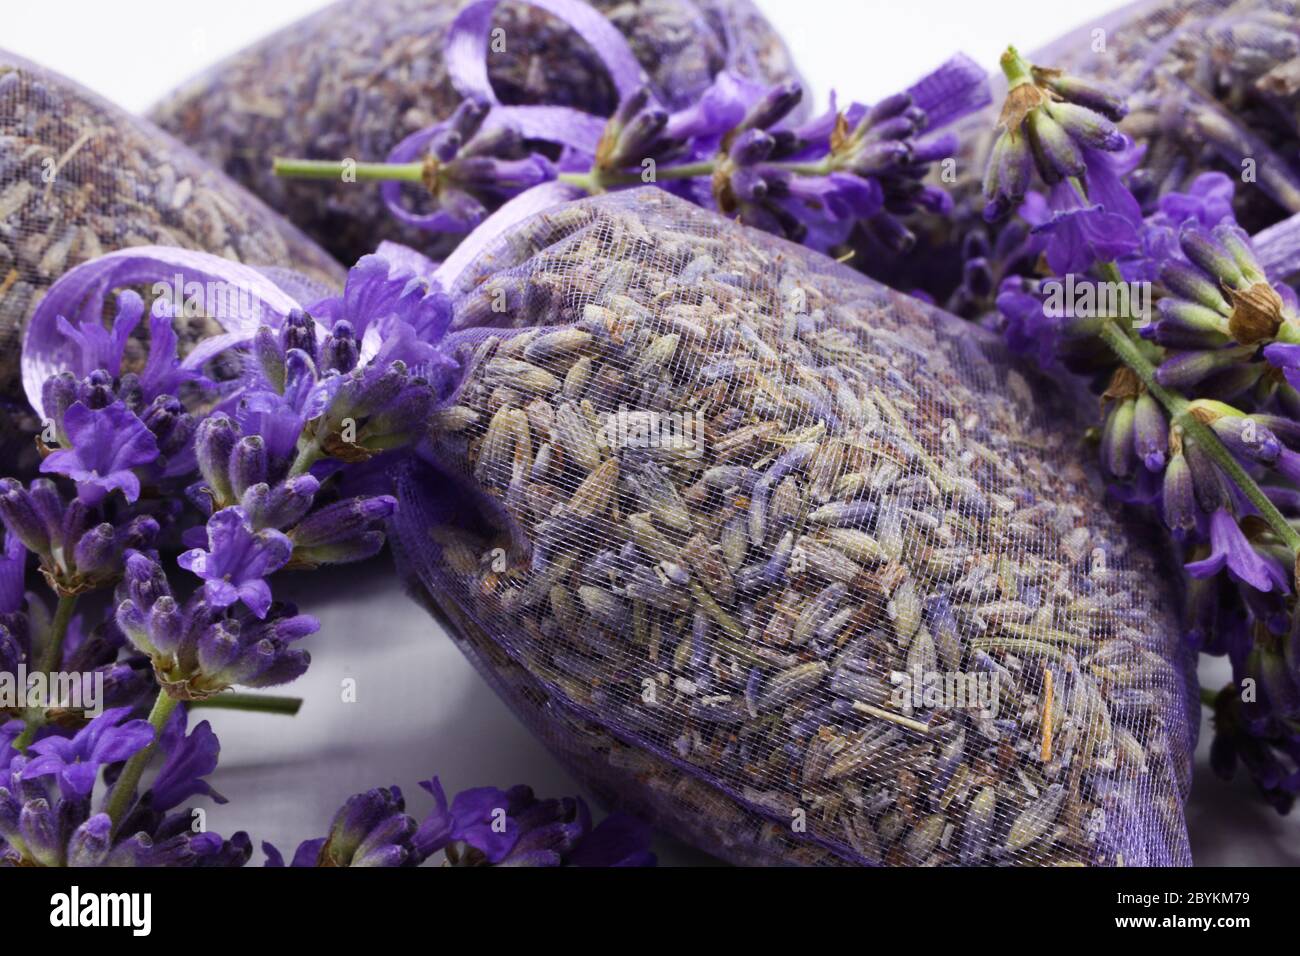 https://c8.alamy.com/comp/2BYKM79/close-up-of-isolated-bagged-dried-lavender-blossom-sacs-used-as-moth-repellent-in-wardrobe-for-clothes-protection-white-background-2BYKM79.jpg